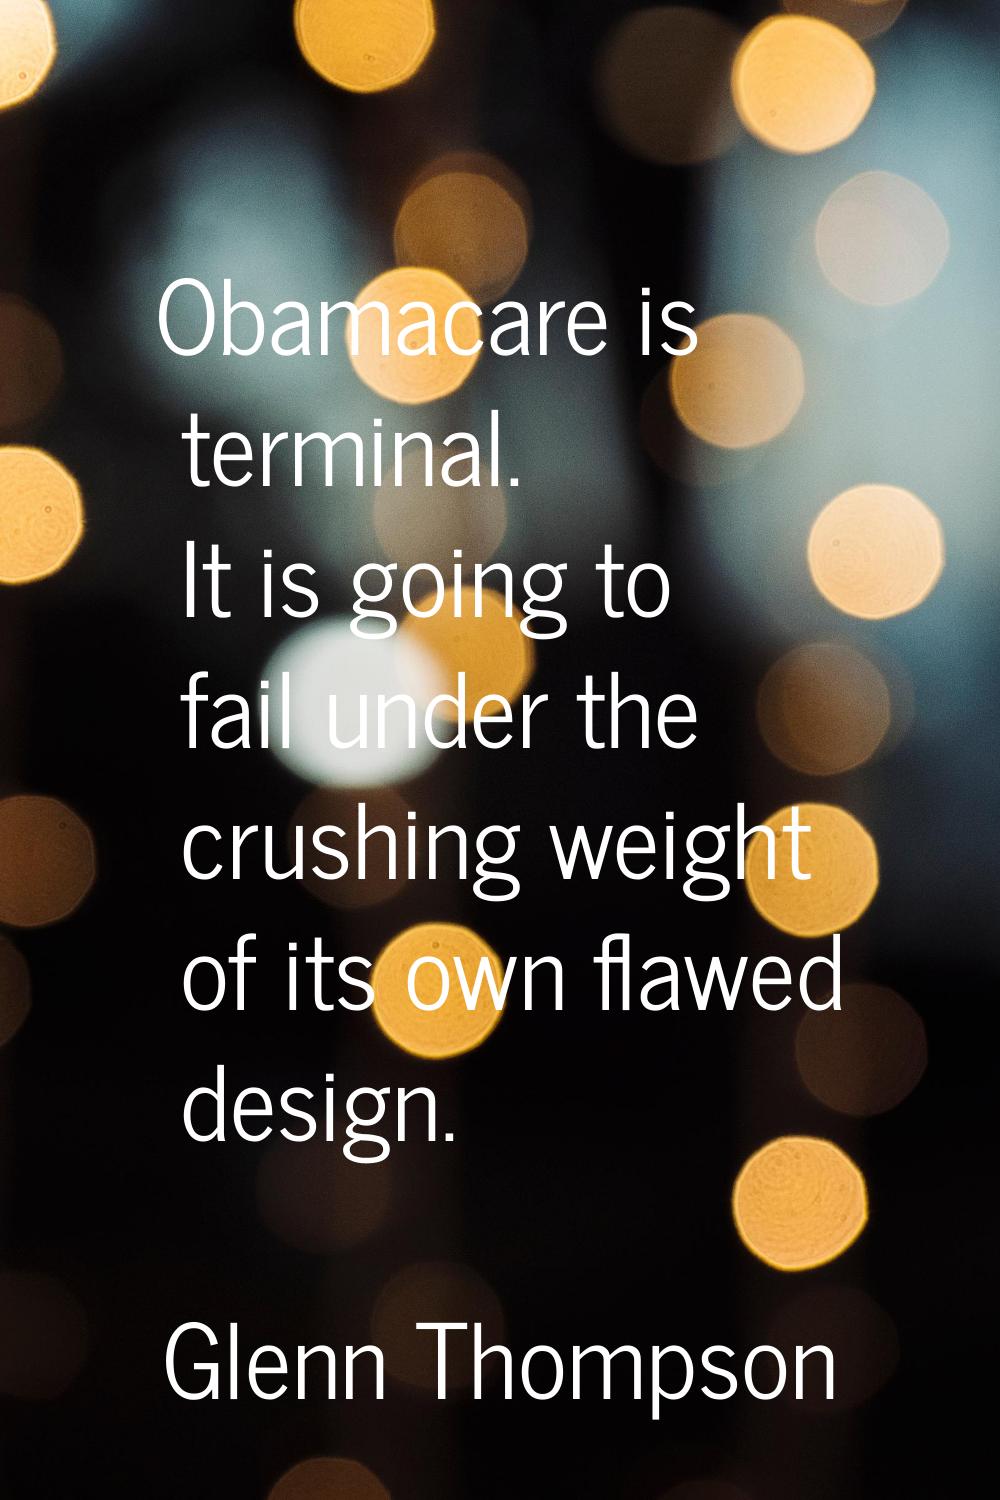 Obamacare is terminal. It is going to fail under the crushing weight of its own flawed design.